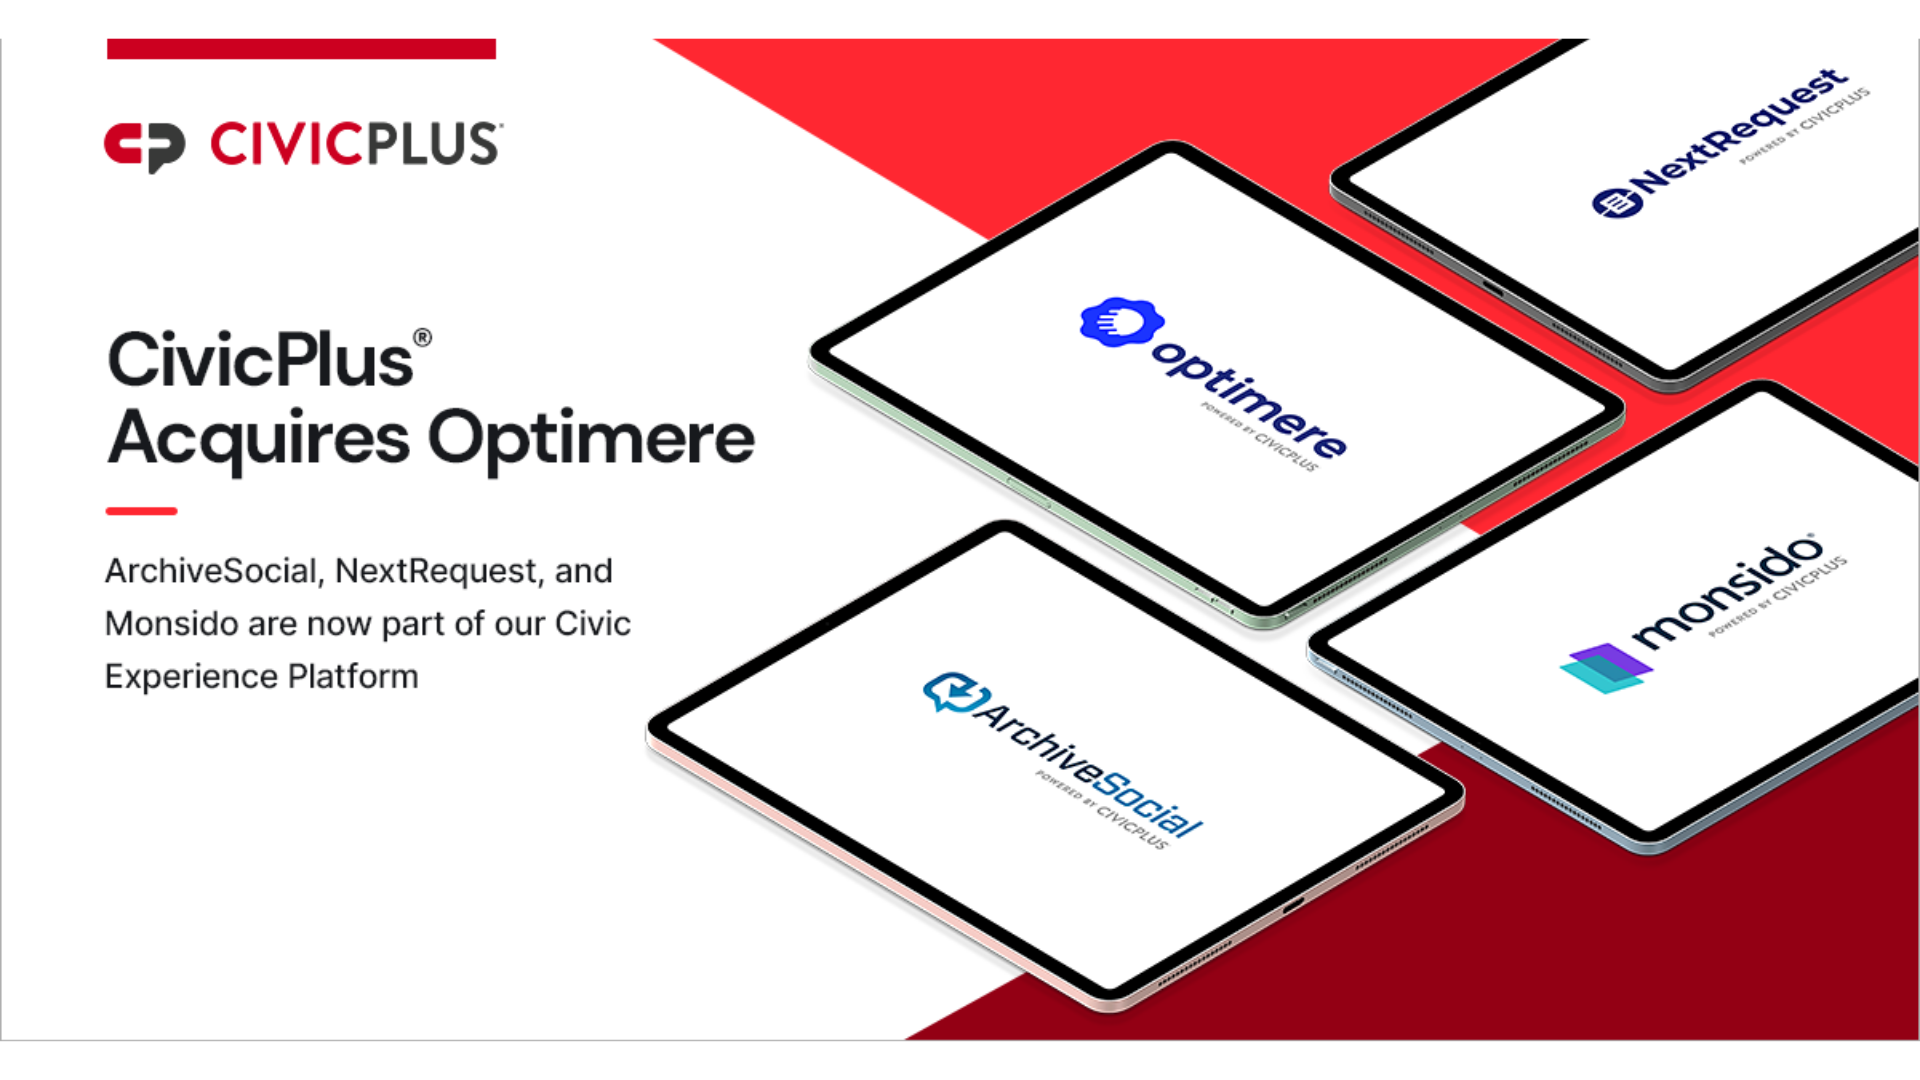 Optimere product logos on tablets with CivicPlus acquires Optimere text